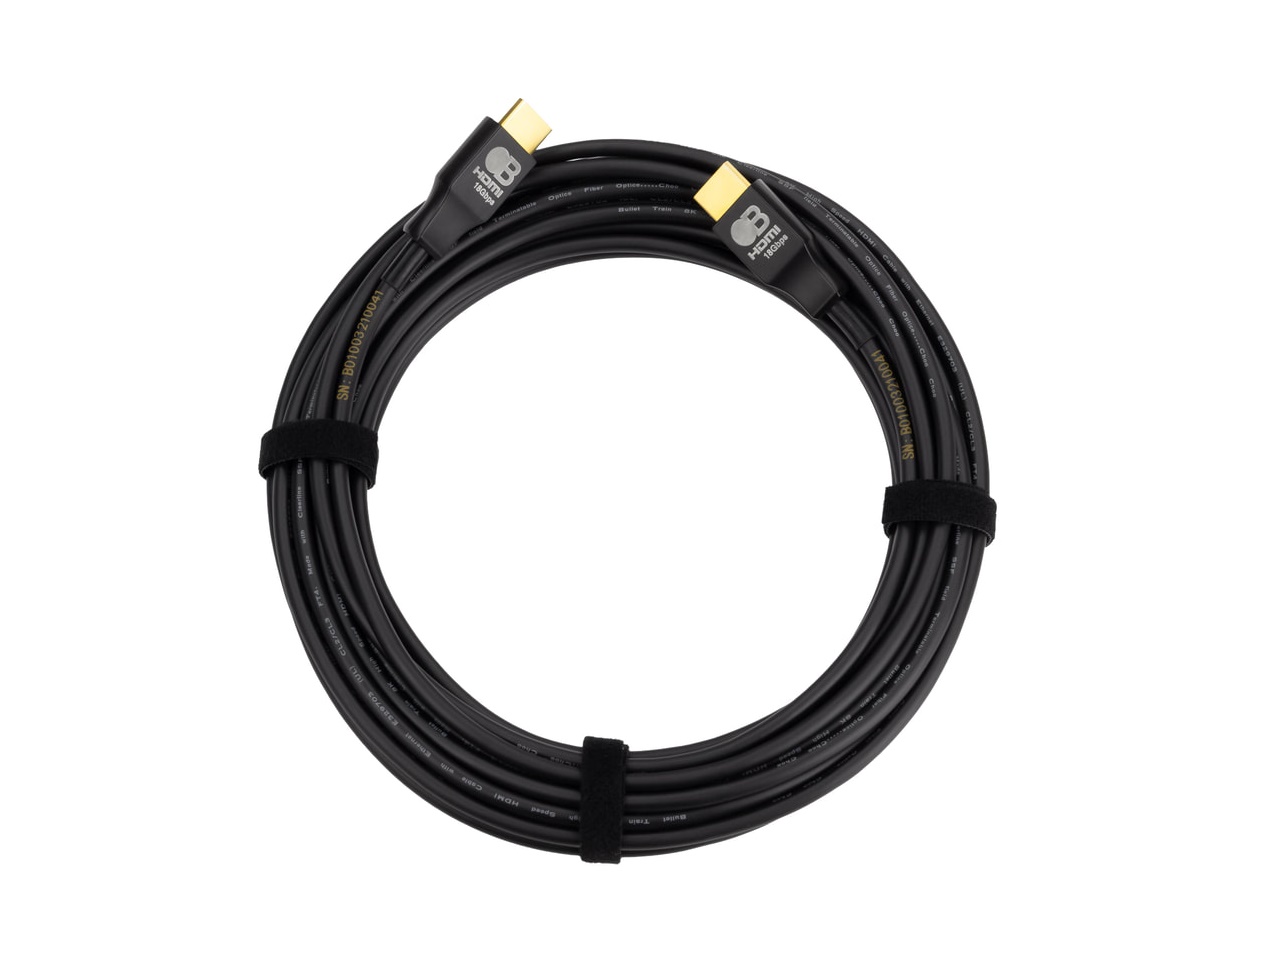 AC-BTSSF-5KUHD-15 15m/49.2ft Premium Active Optical HDMI Cable by AVPro Edge